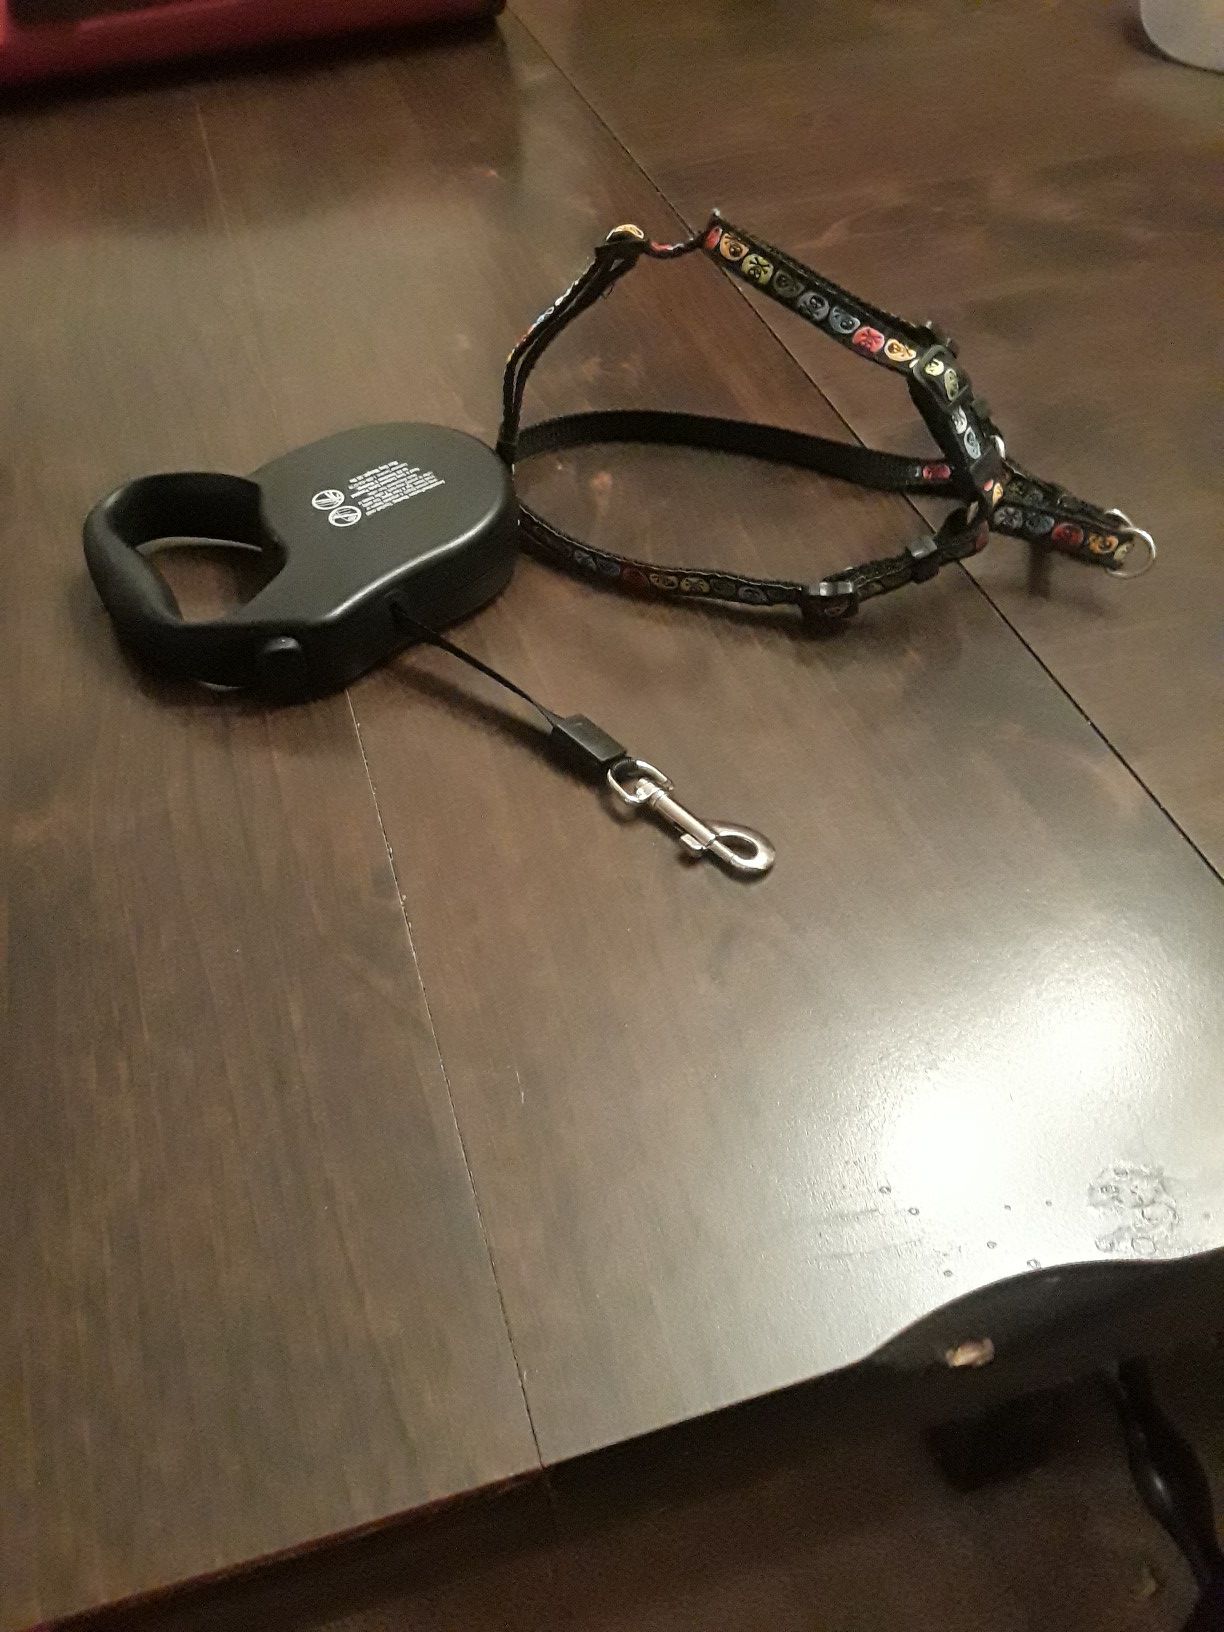 Retractable dog leash and harness